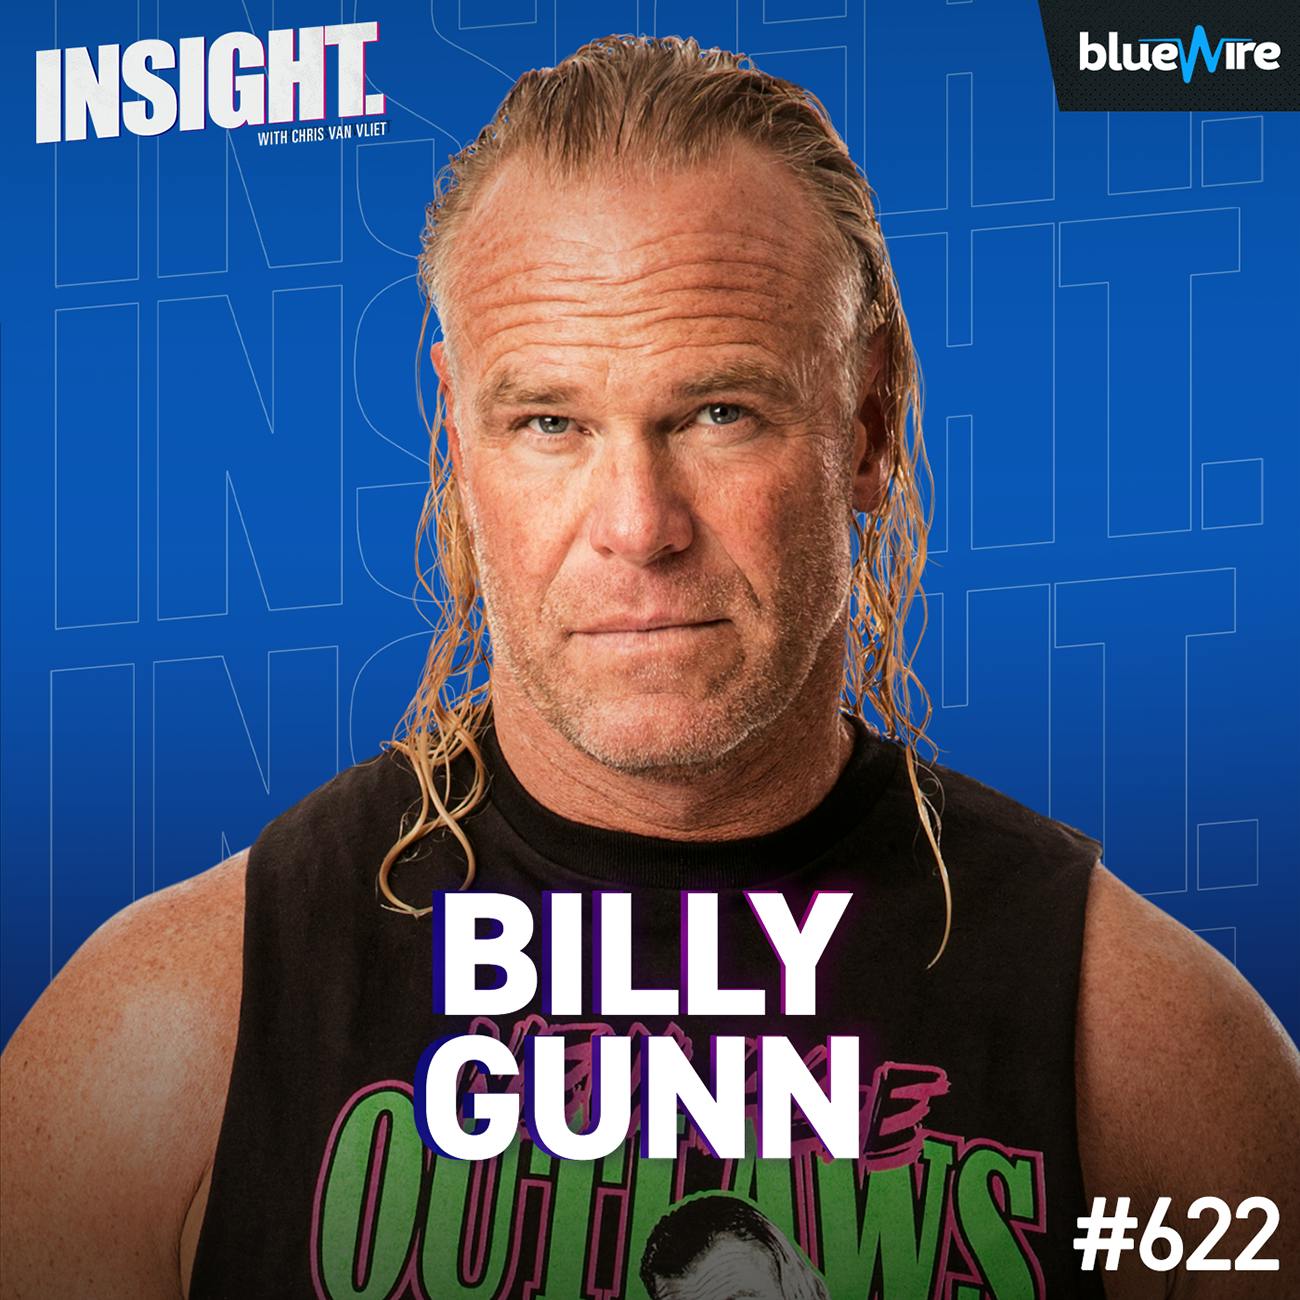 Billy Gunn Is JACKED at 60! AEW, New Age Outlaws, DX Reunion, Retirement Dream Match